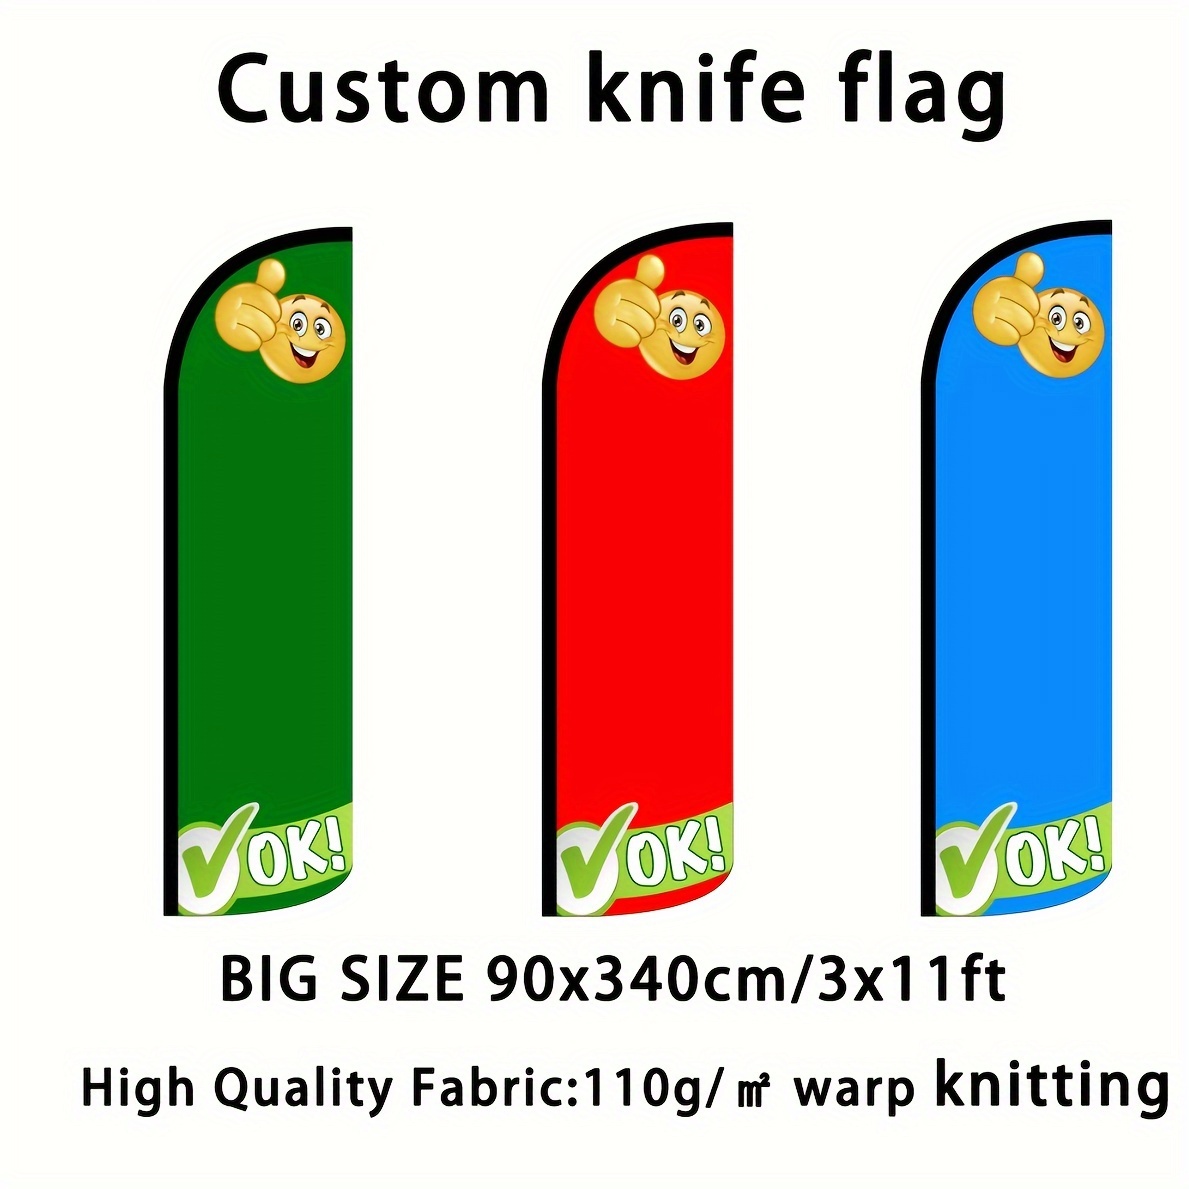 

1pc Custom Promotional Advertising Swooper Knife Flag, Digital Printing, Suitable For Various Events, Small Business Supplies, Flagpole Not Included